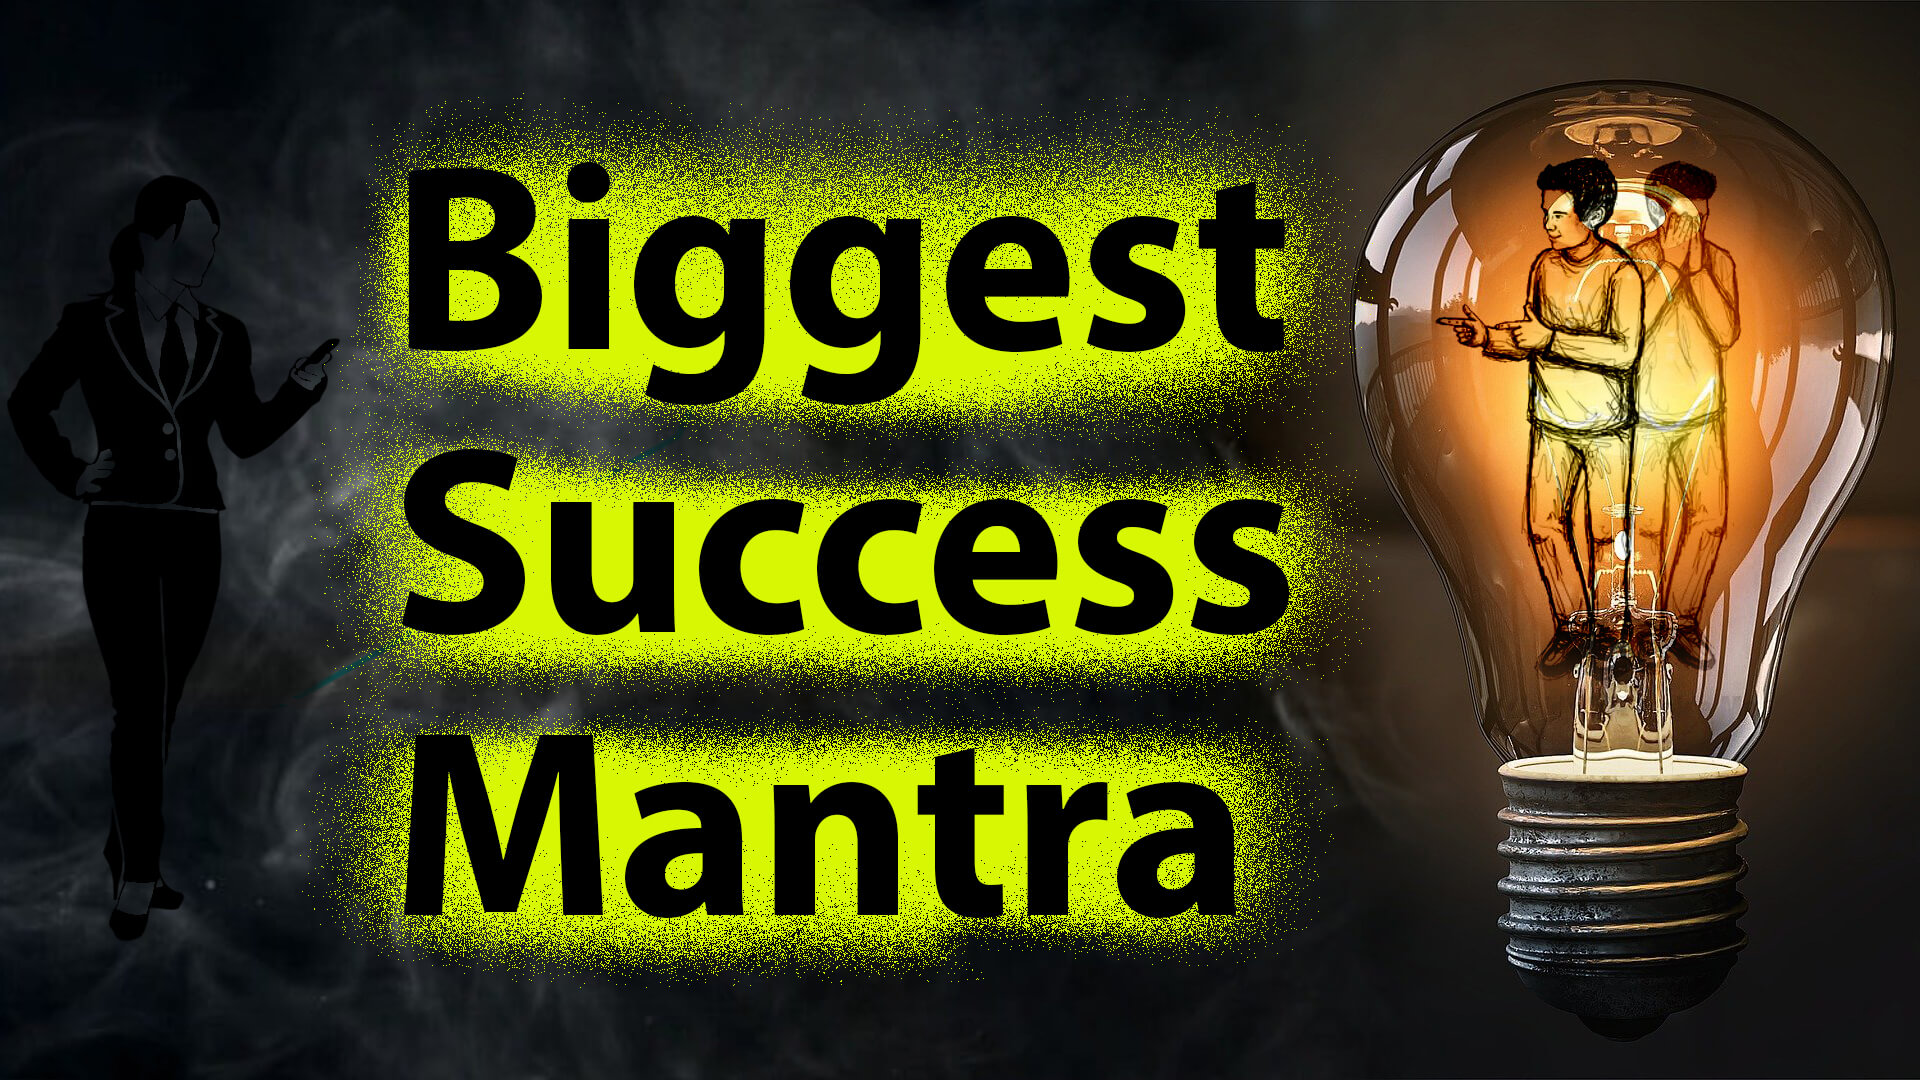 You are currently viewing Biggest Success Mantra in Hindi – Life Mantra in Hindi